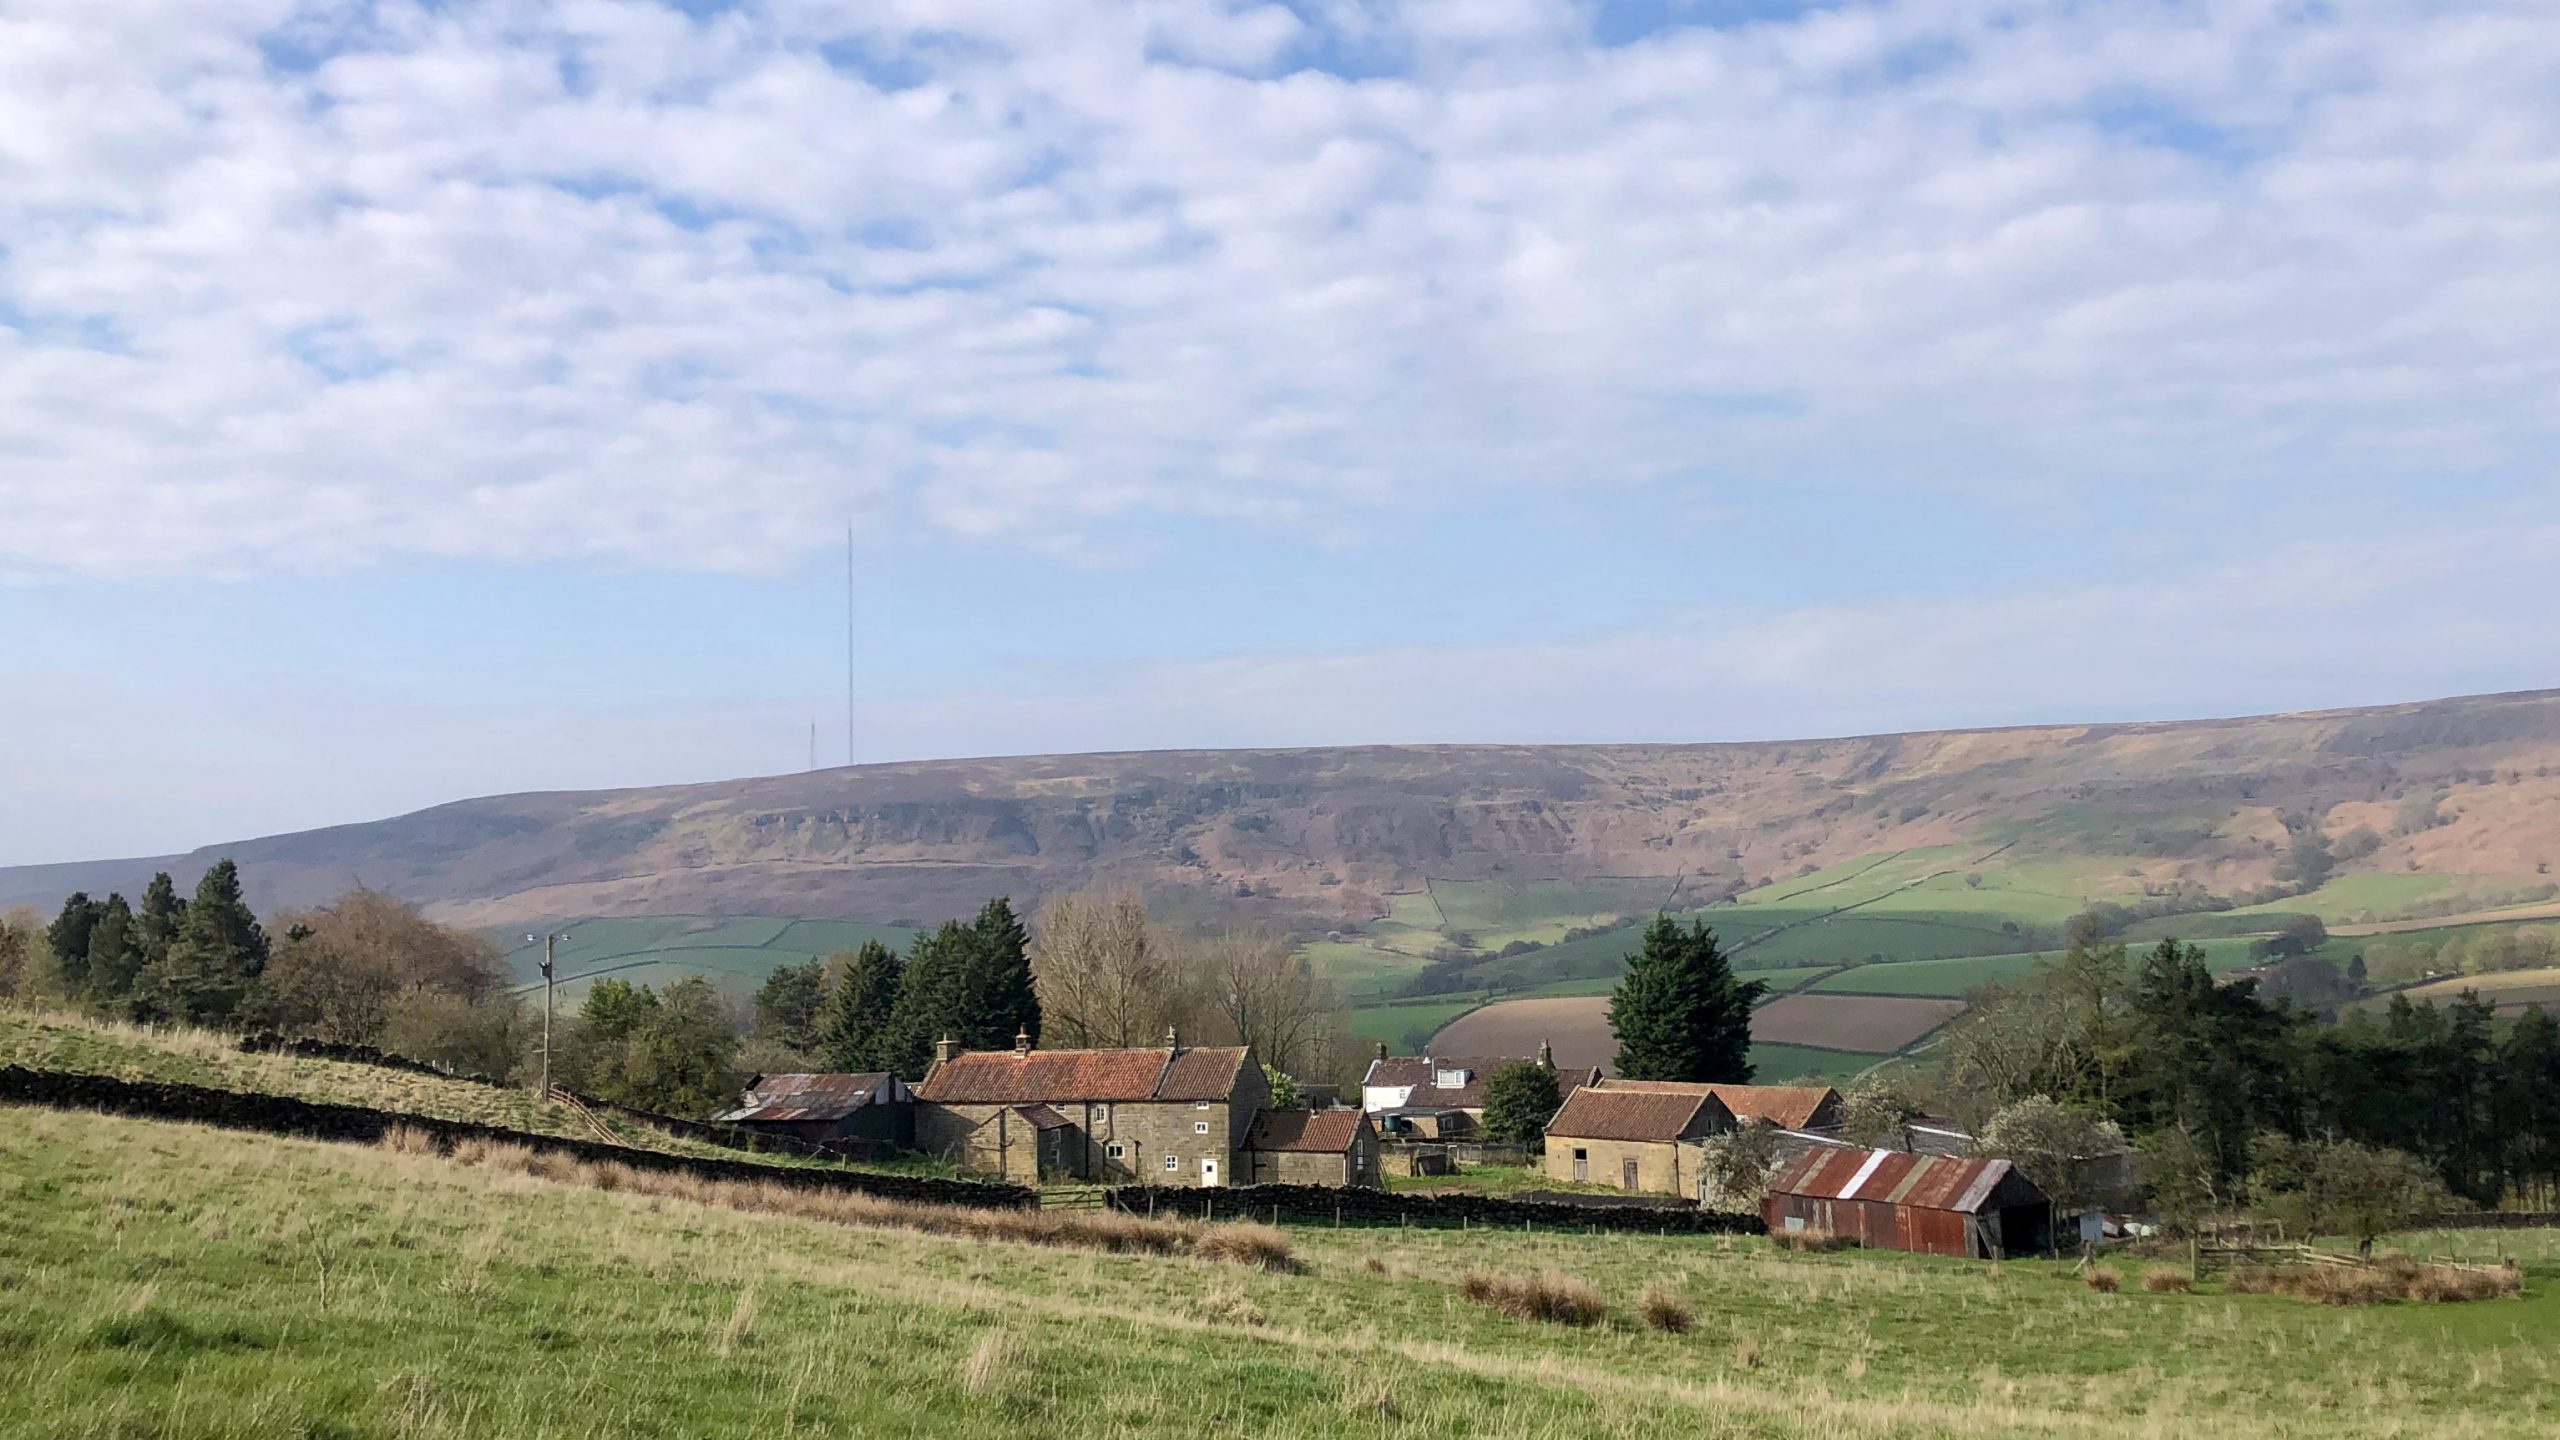 The iconic Bilsdale Mast has reached its final heights